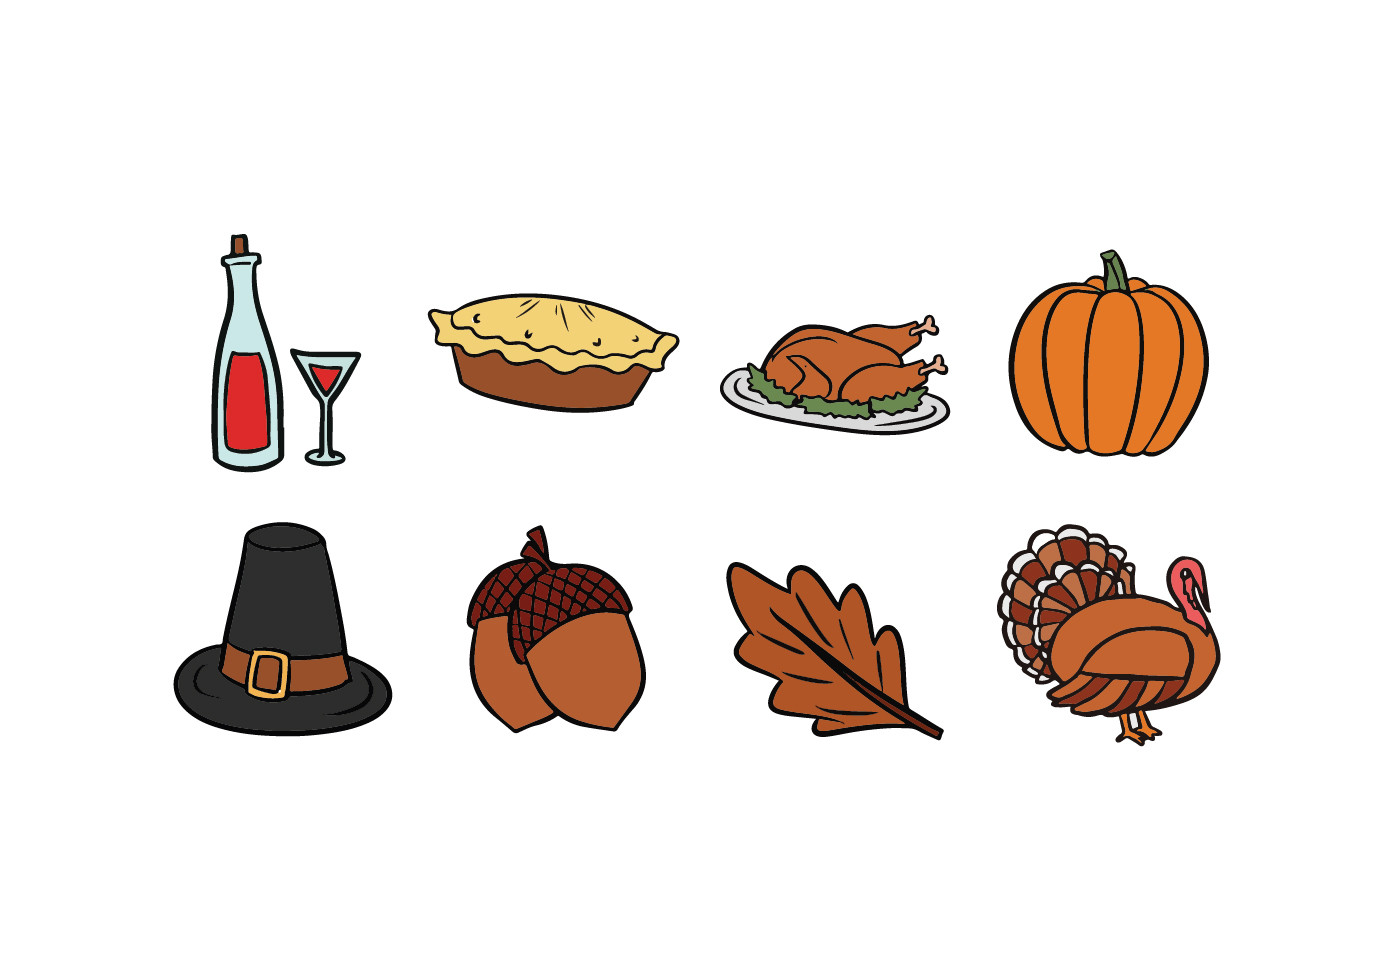 Thanksgiving Turkey Vector
 Thanksgiving Hand Drawn Icons Download Free Vector Art